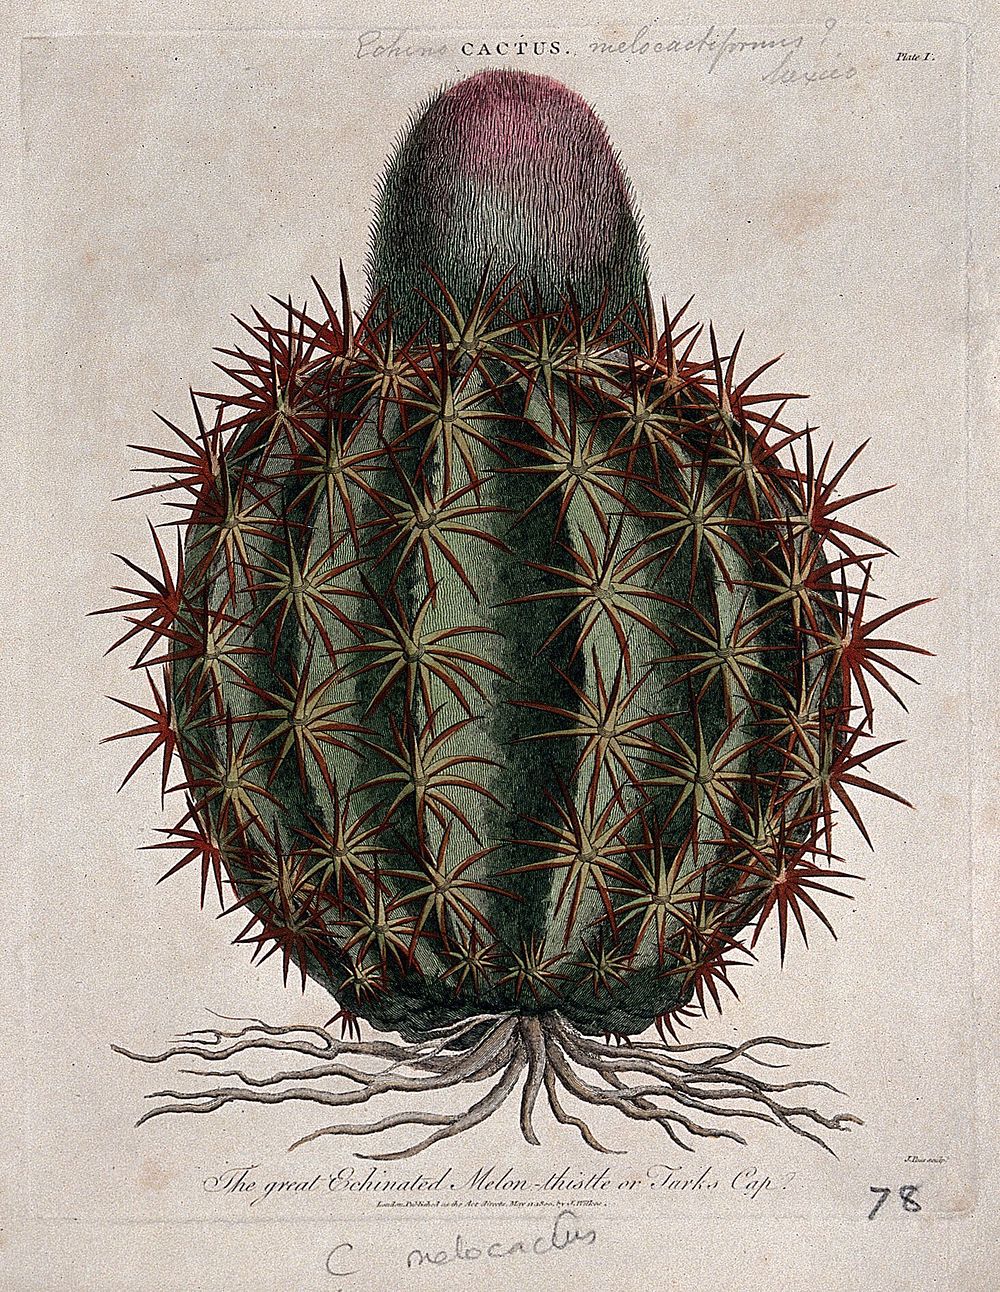 Turk's cap cactus (Melocactus communis): flowering plant. Coloured etching by J. Pass, c. 1800, after J. Ihle.